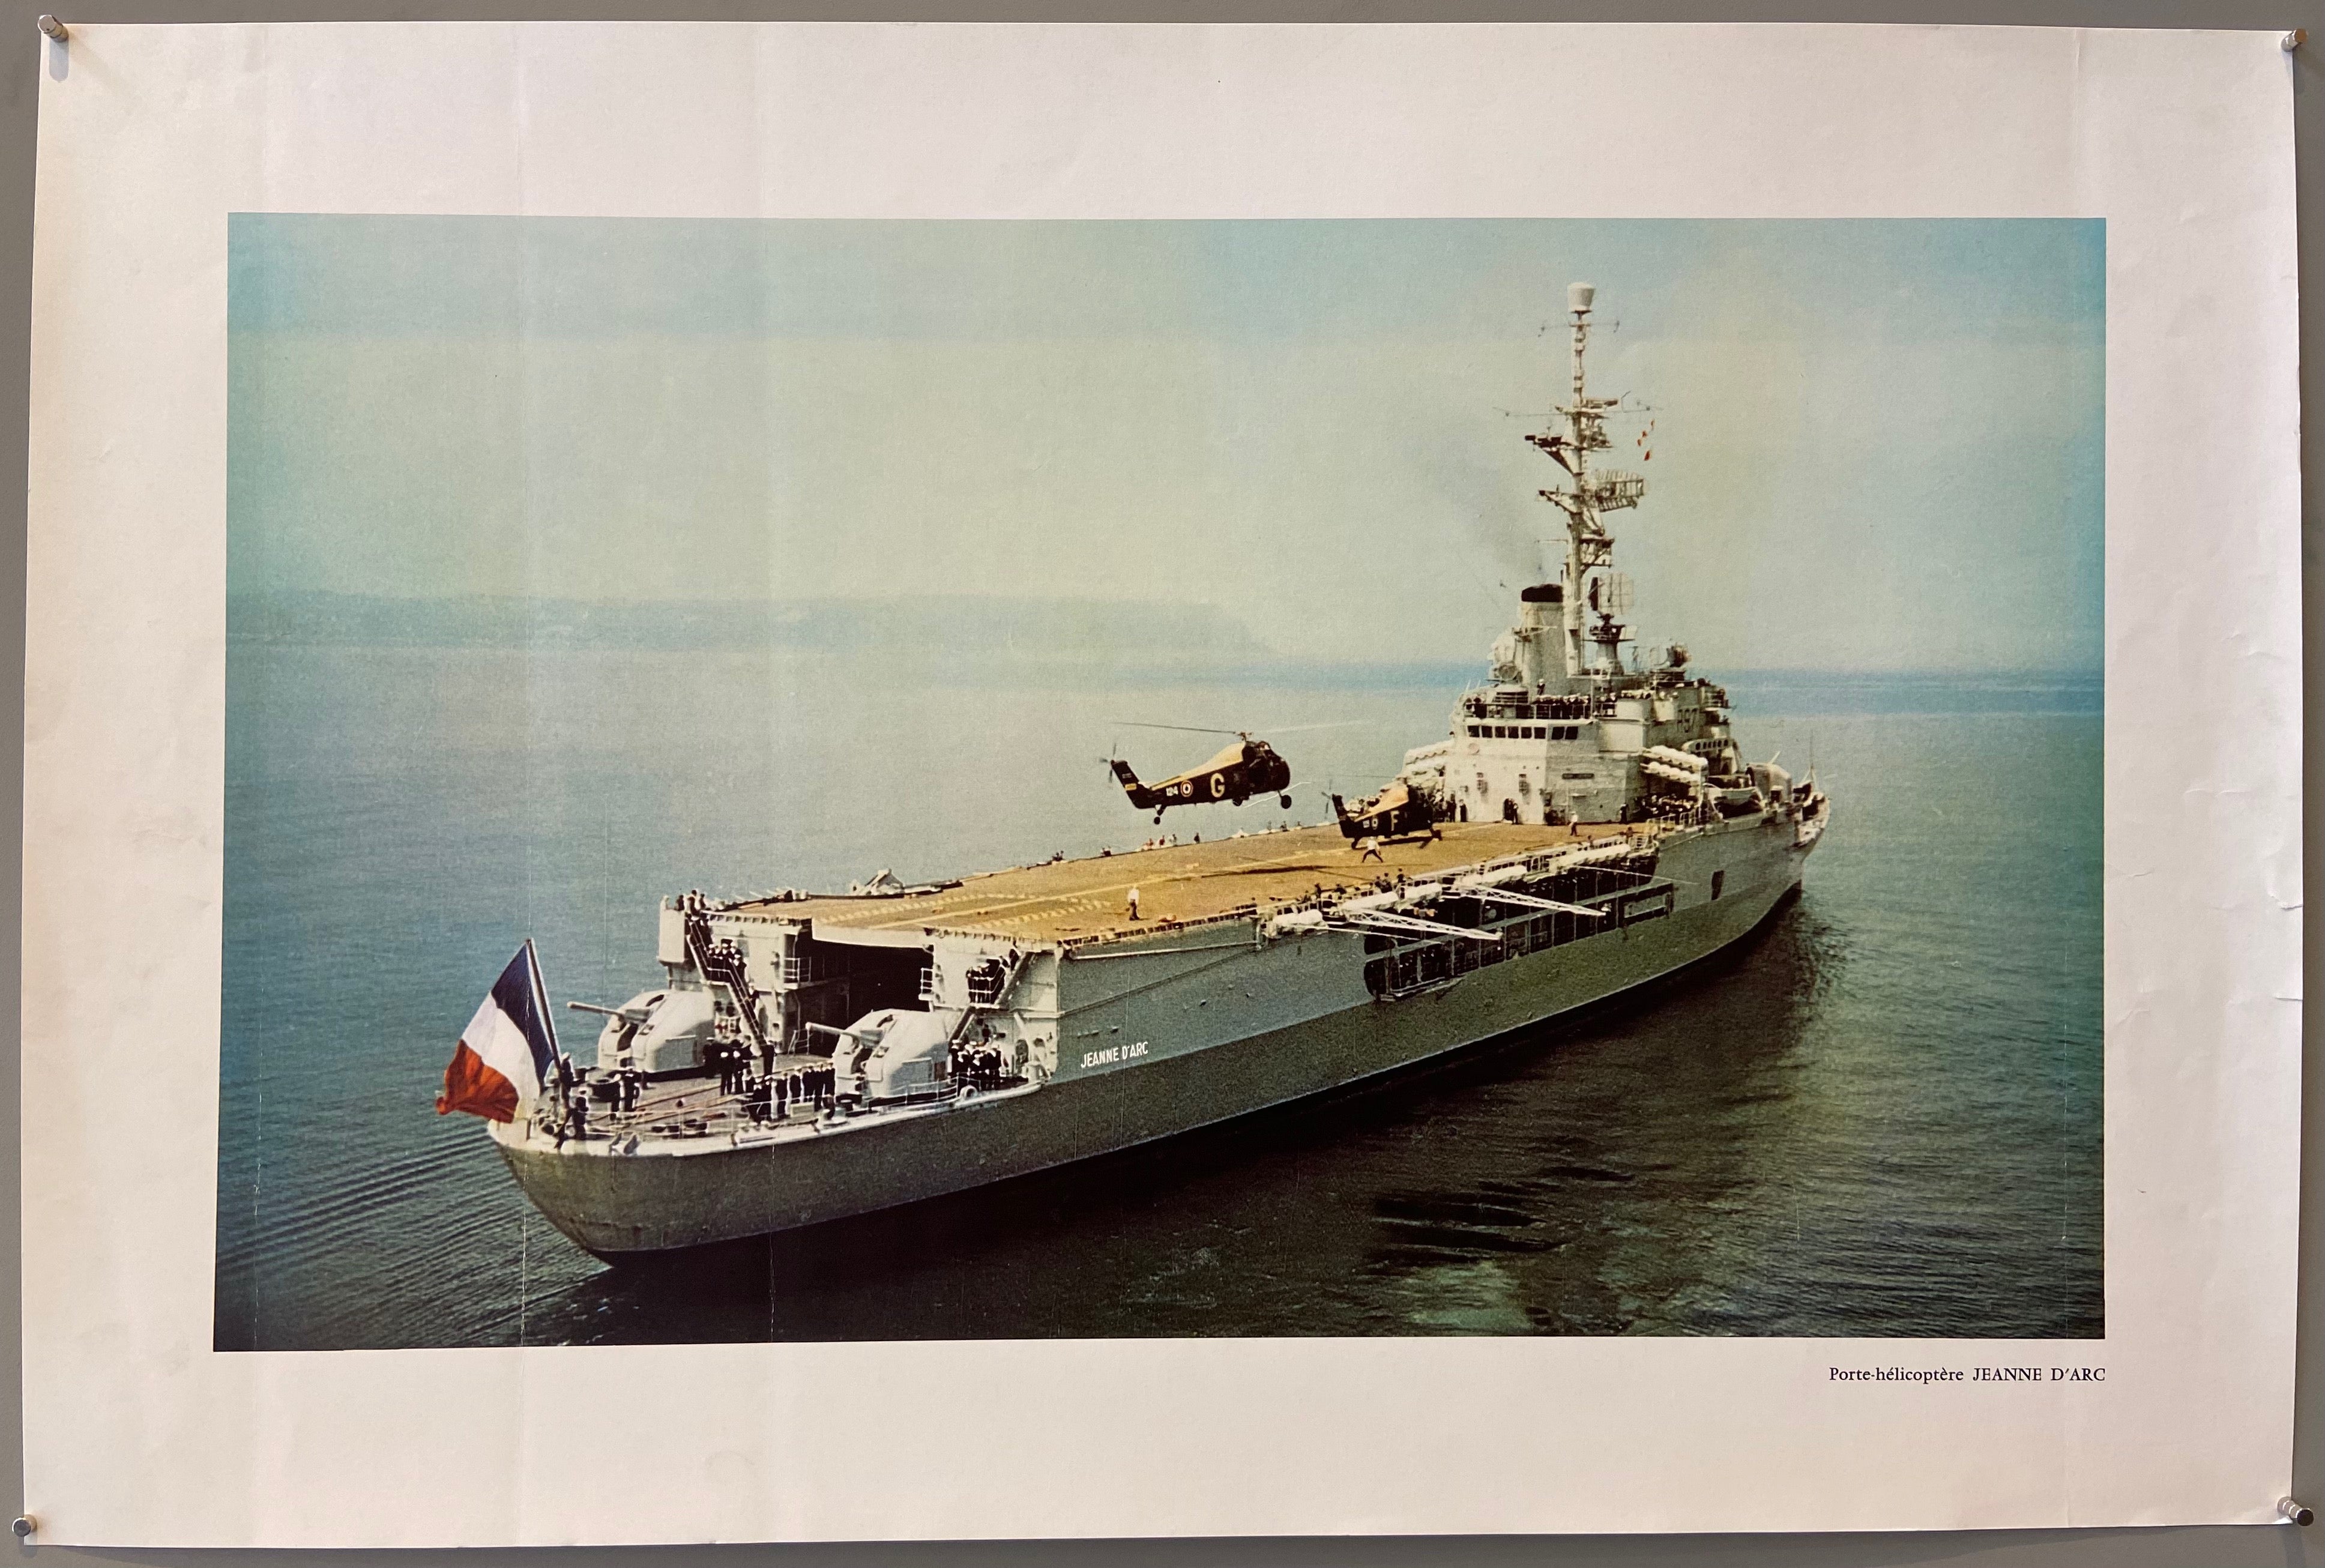 Poster of a French helicopter cruiser